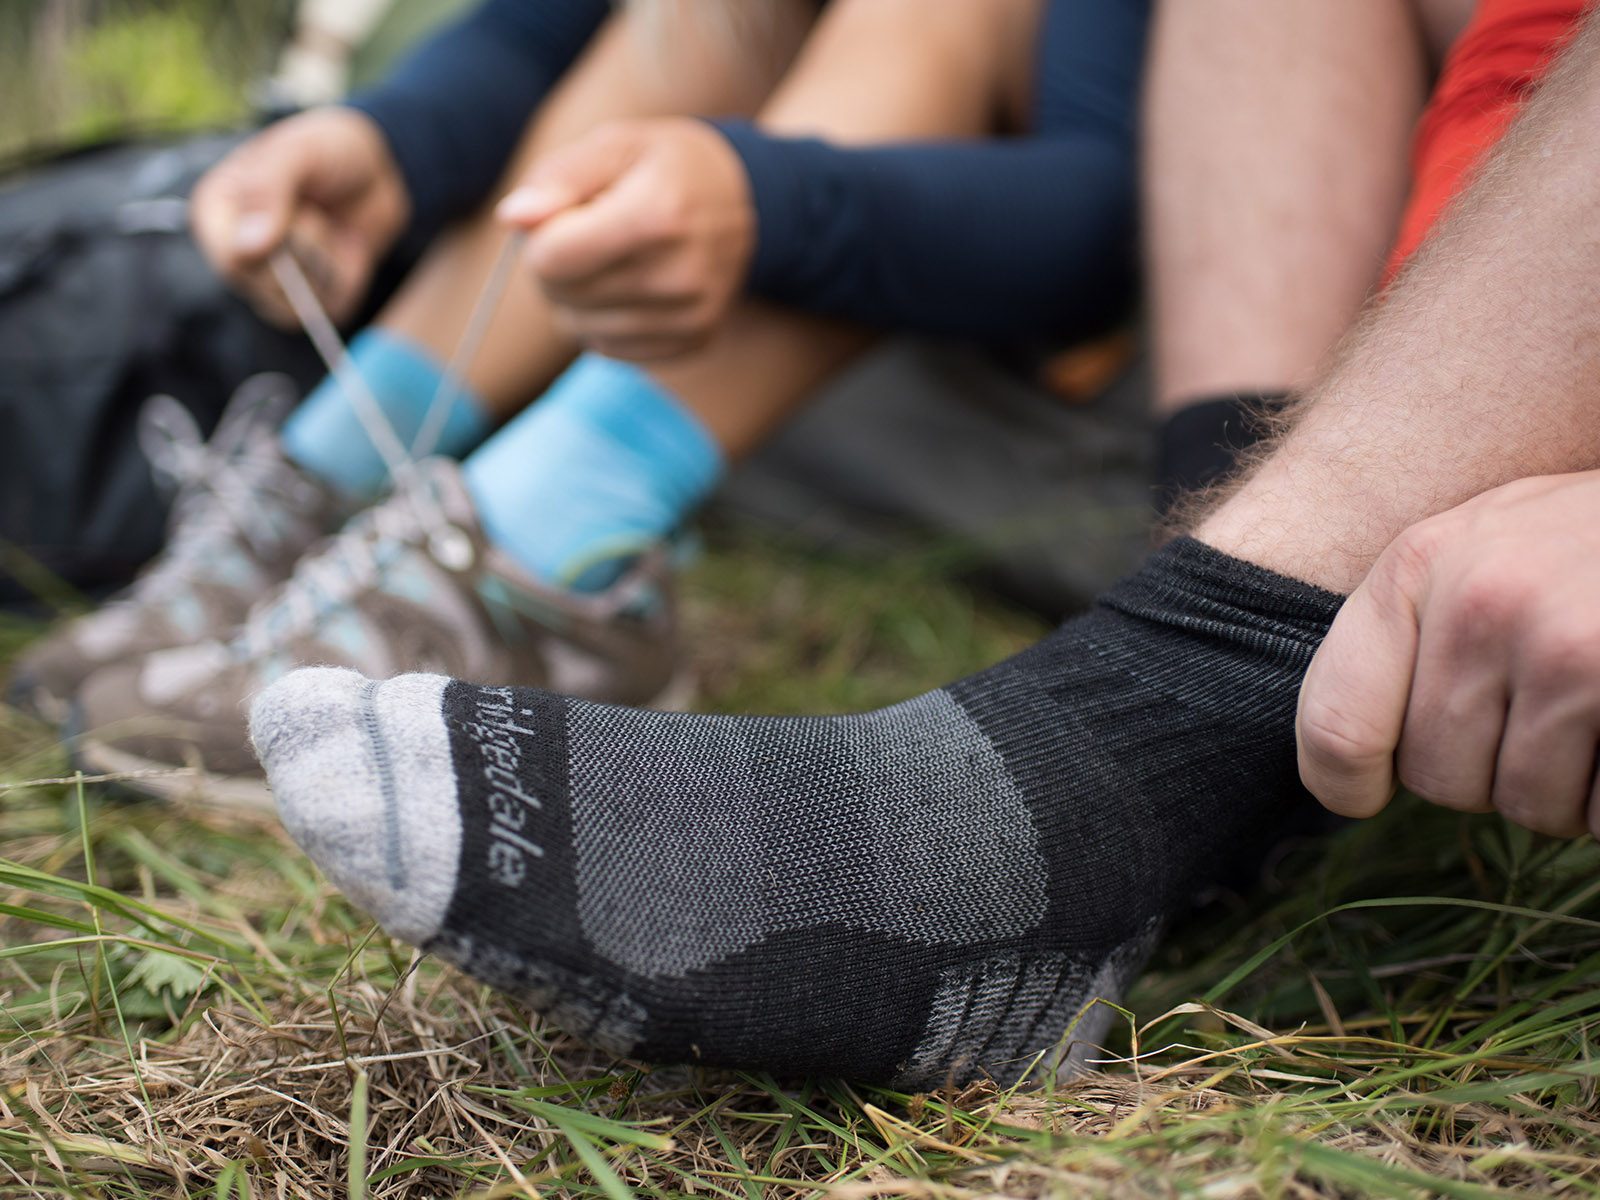 Eight questions you never knew to ask about walking socks - The